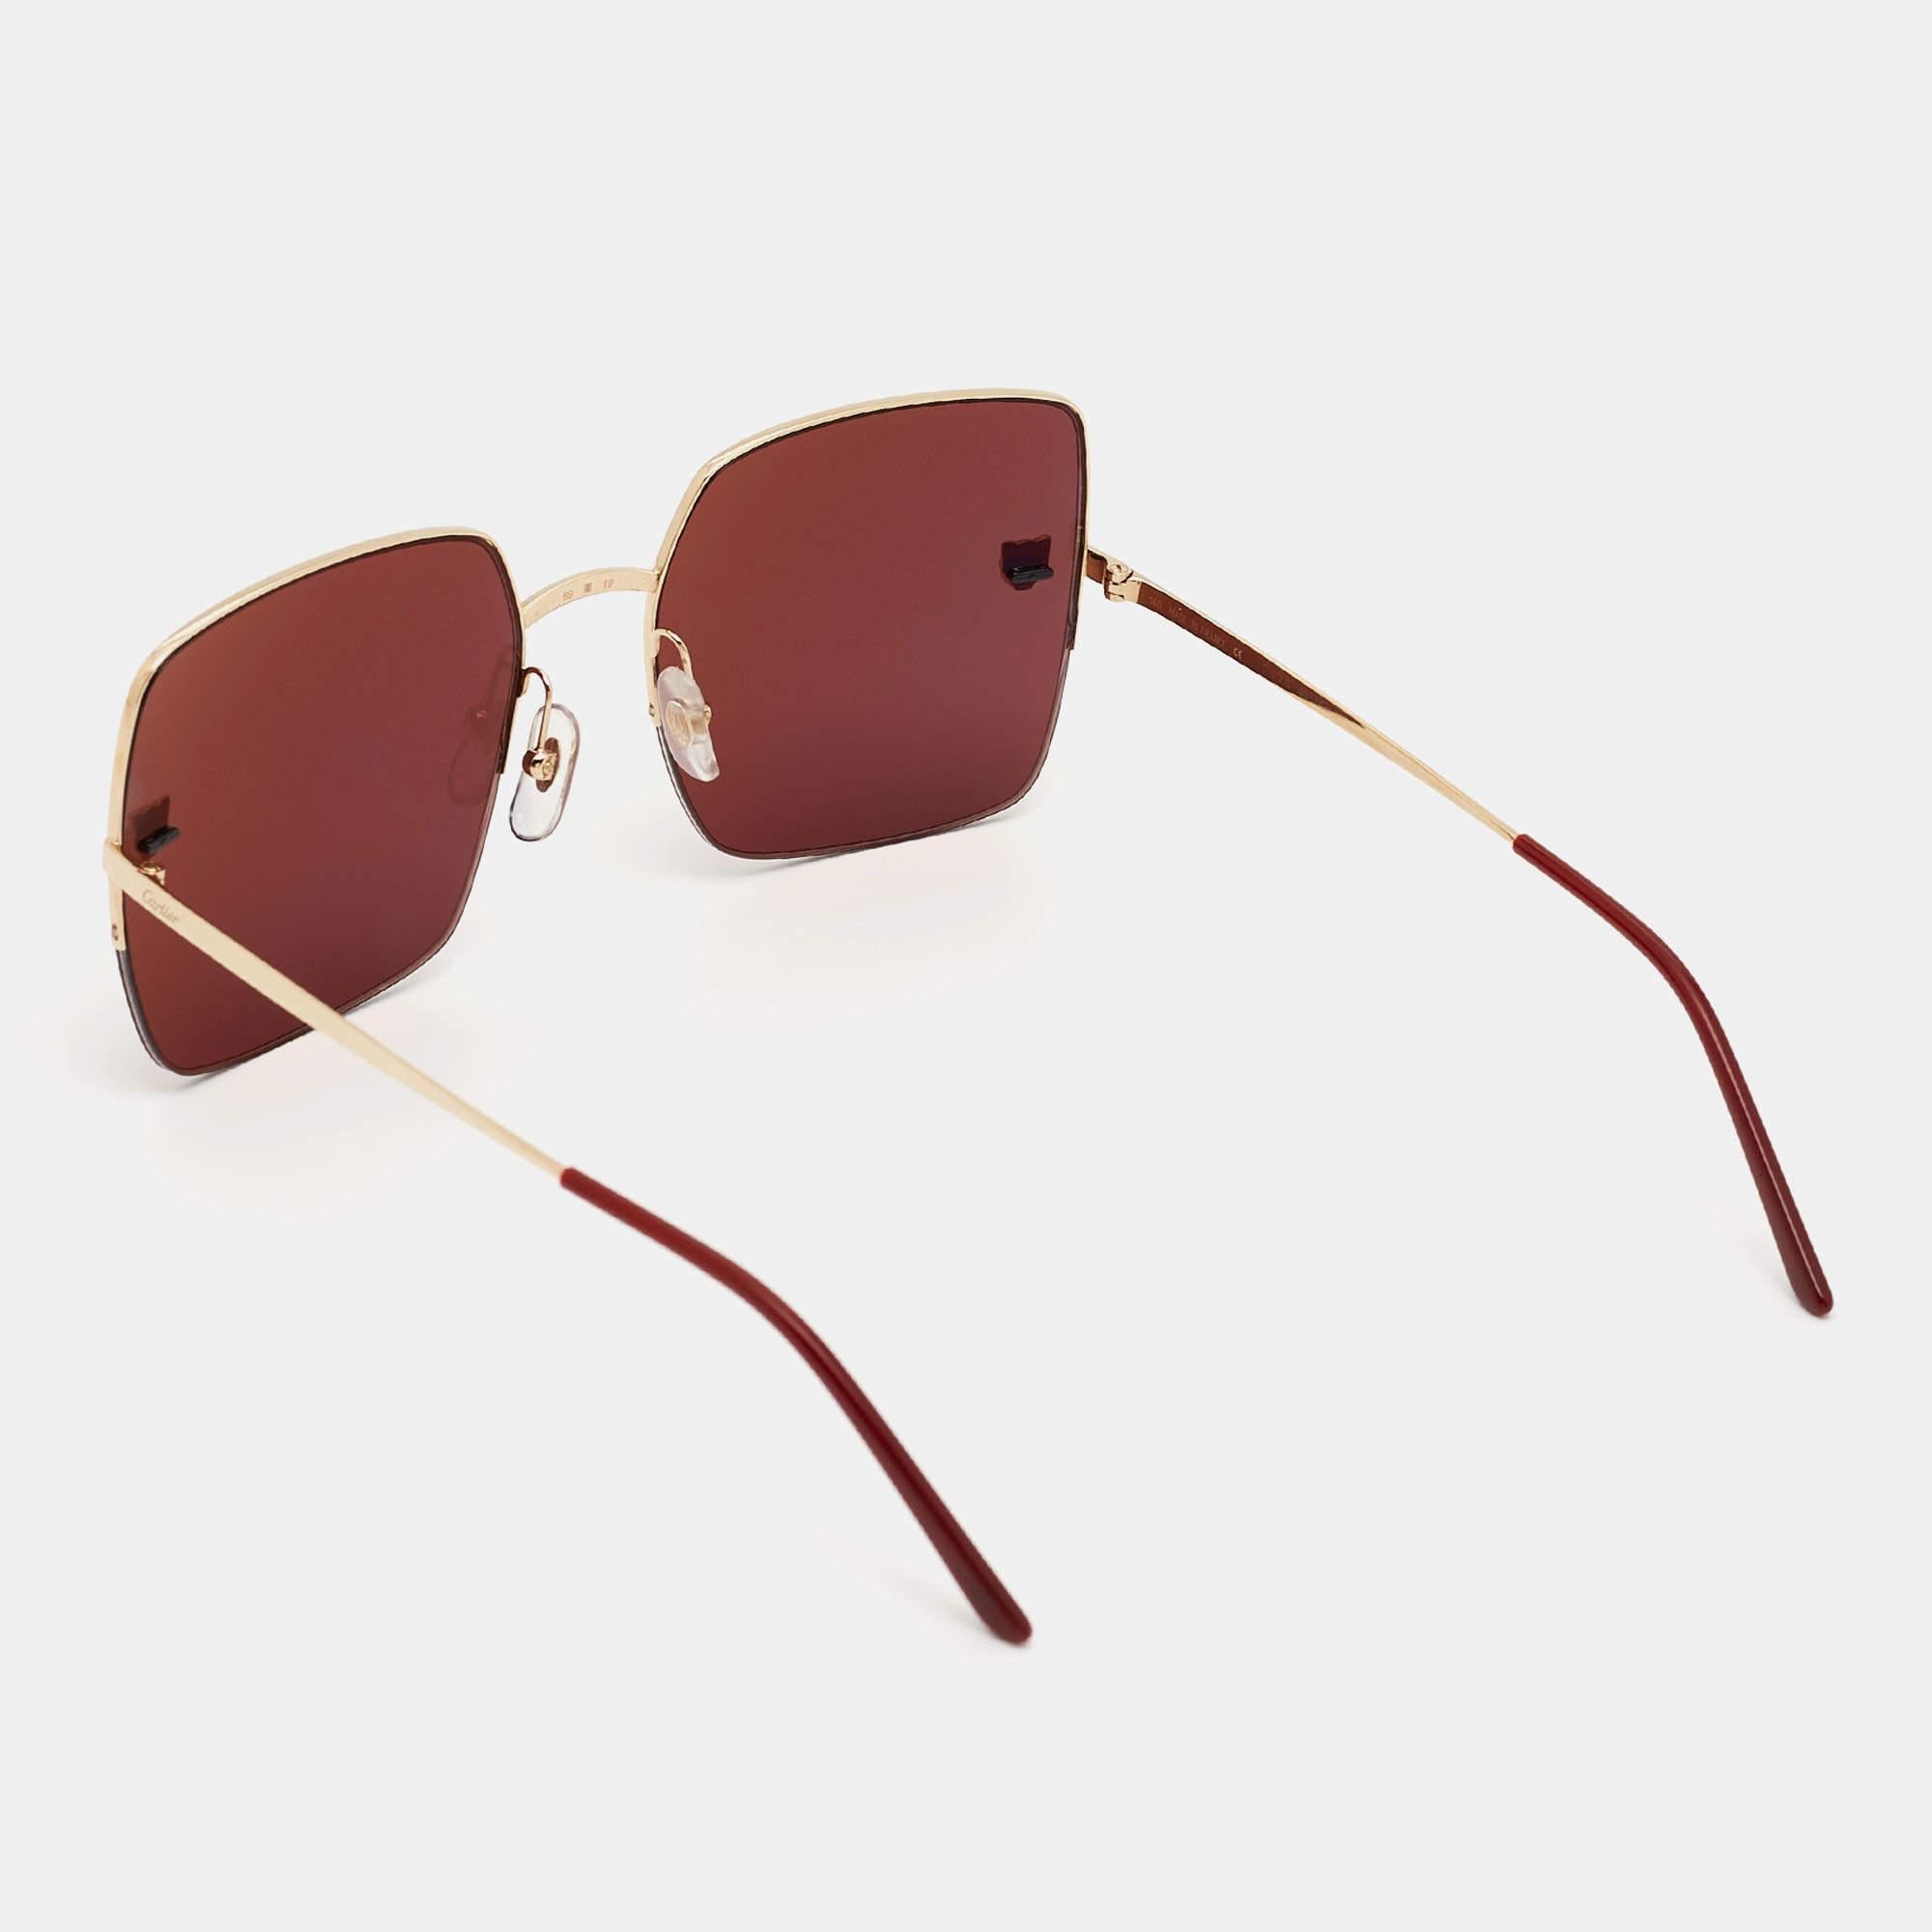 Embrace timeless allure with Cartier's Panthère de Cartier sunglasses. Crafted with precision and finesse, these sunglasses feature a striking burgundy hue, complemented by sleek square frames and iconic panther accents. Effortlessly blend style and